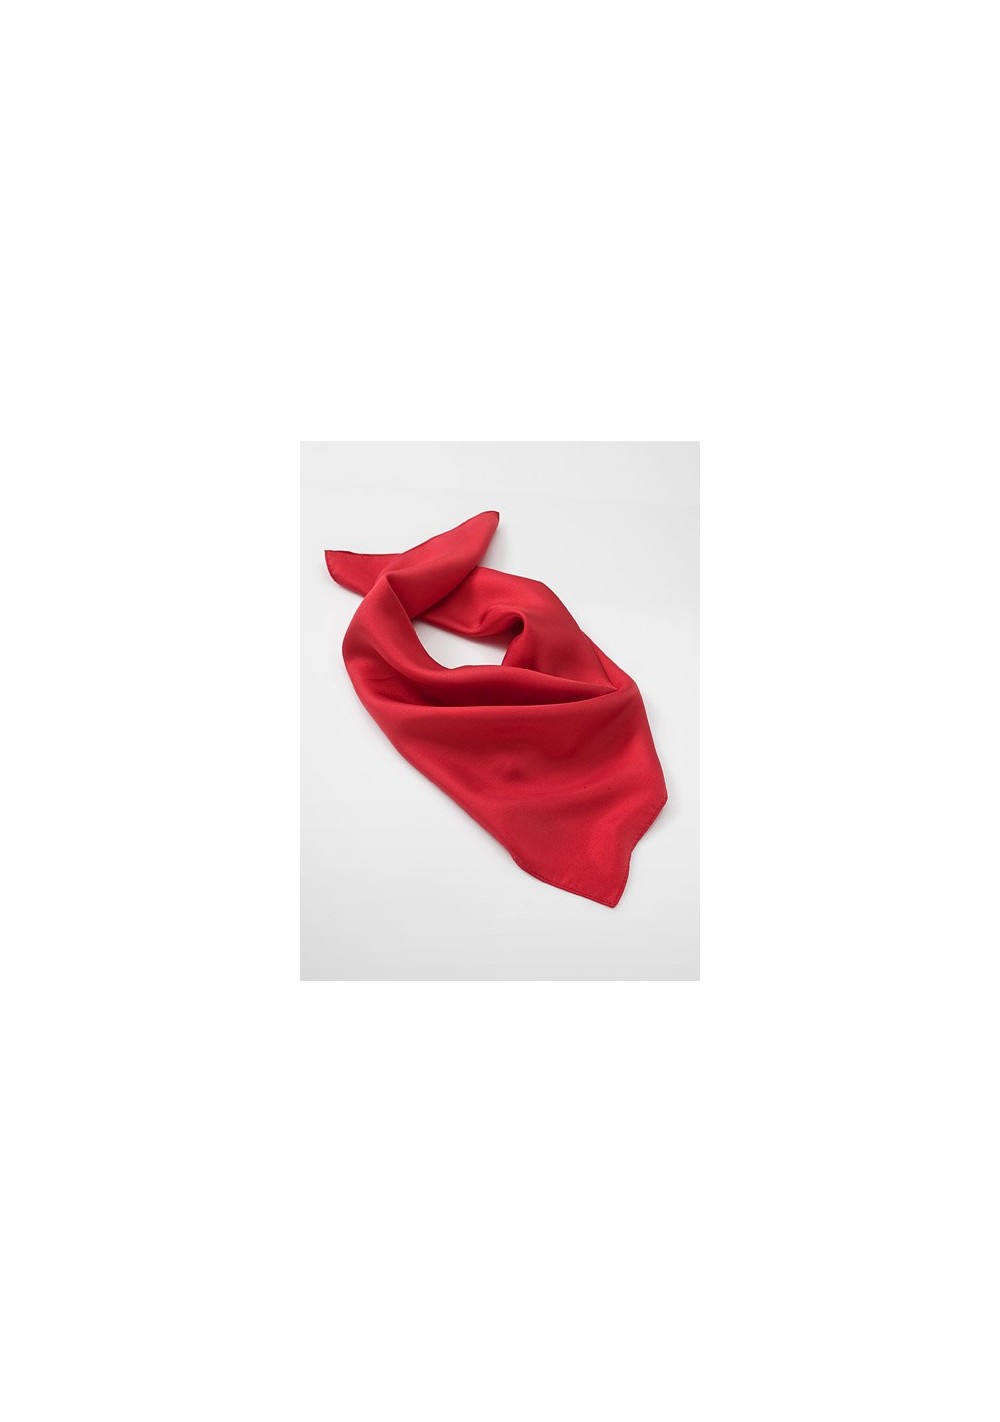 Bright Red Womans Scarf